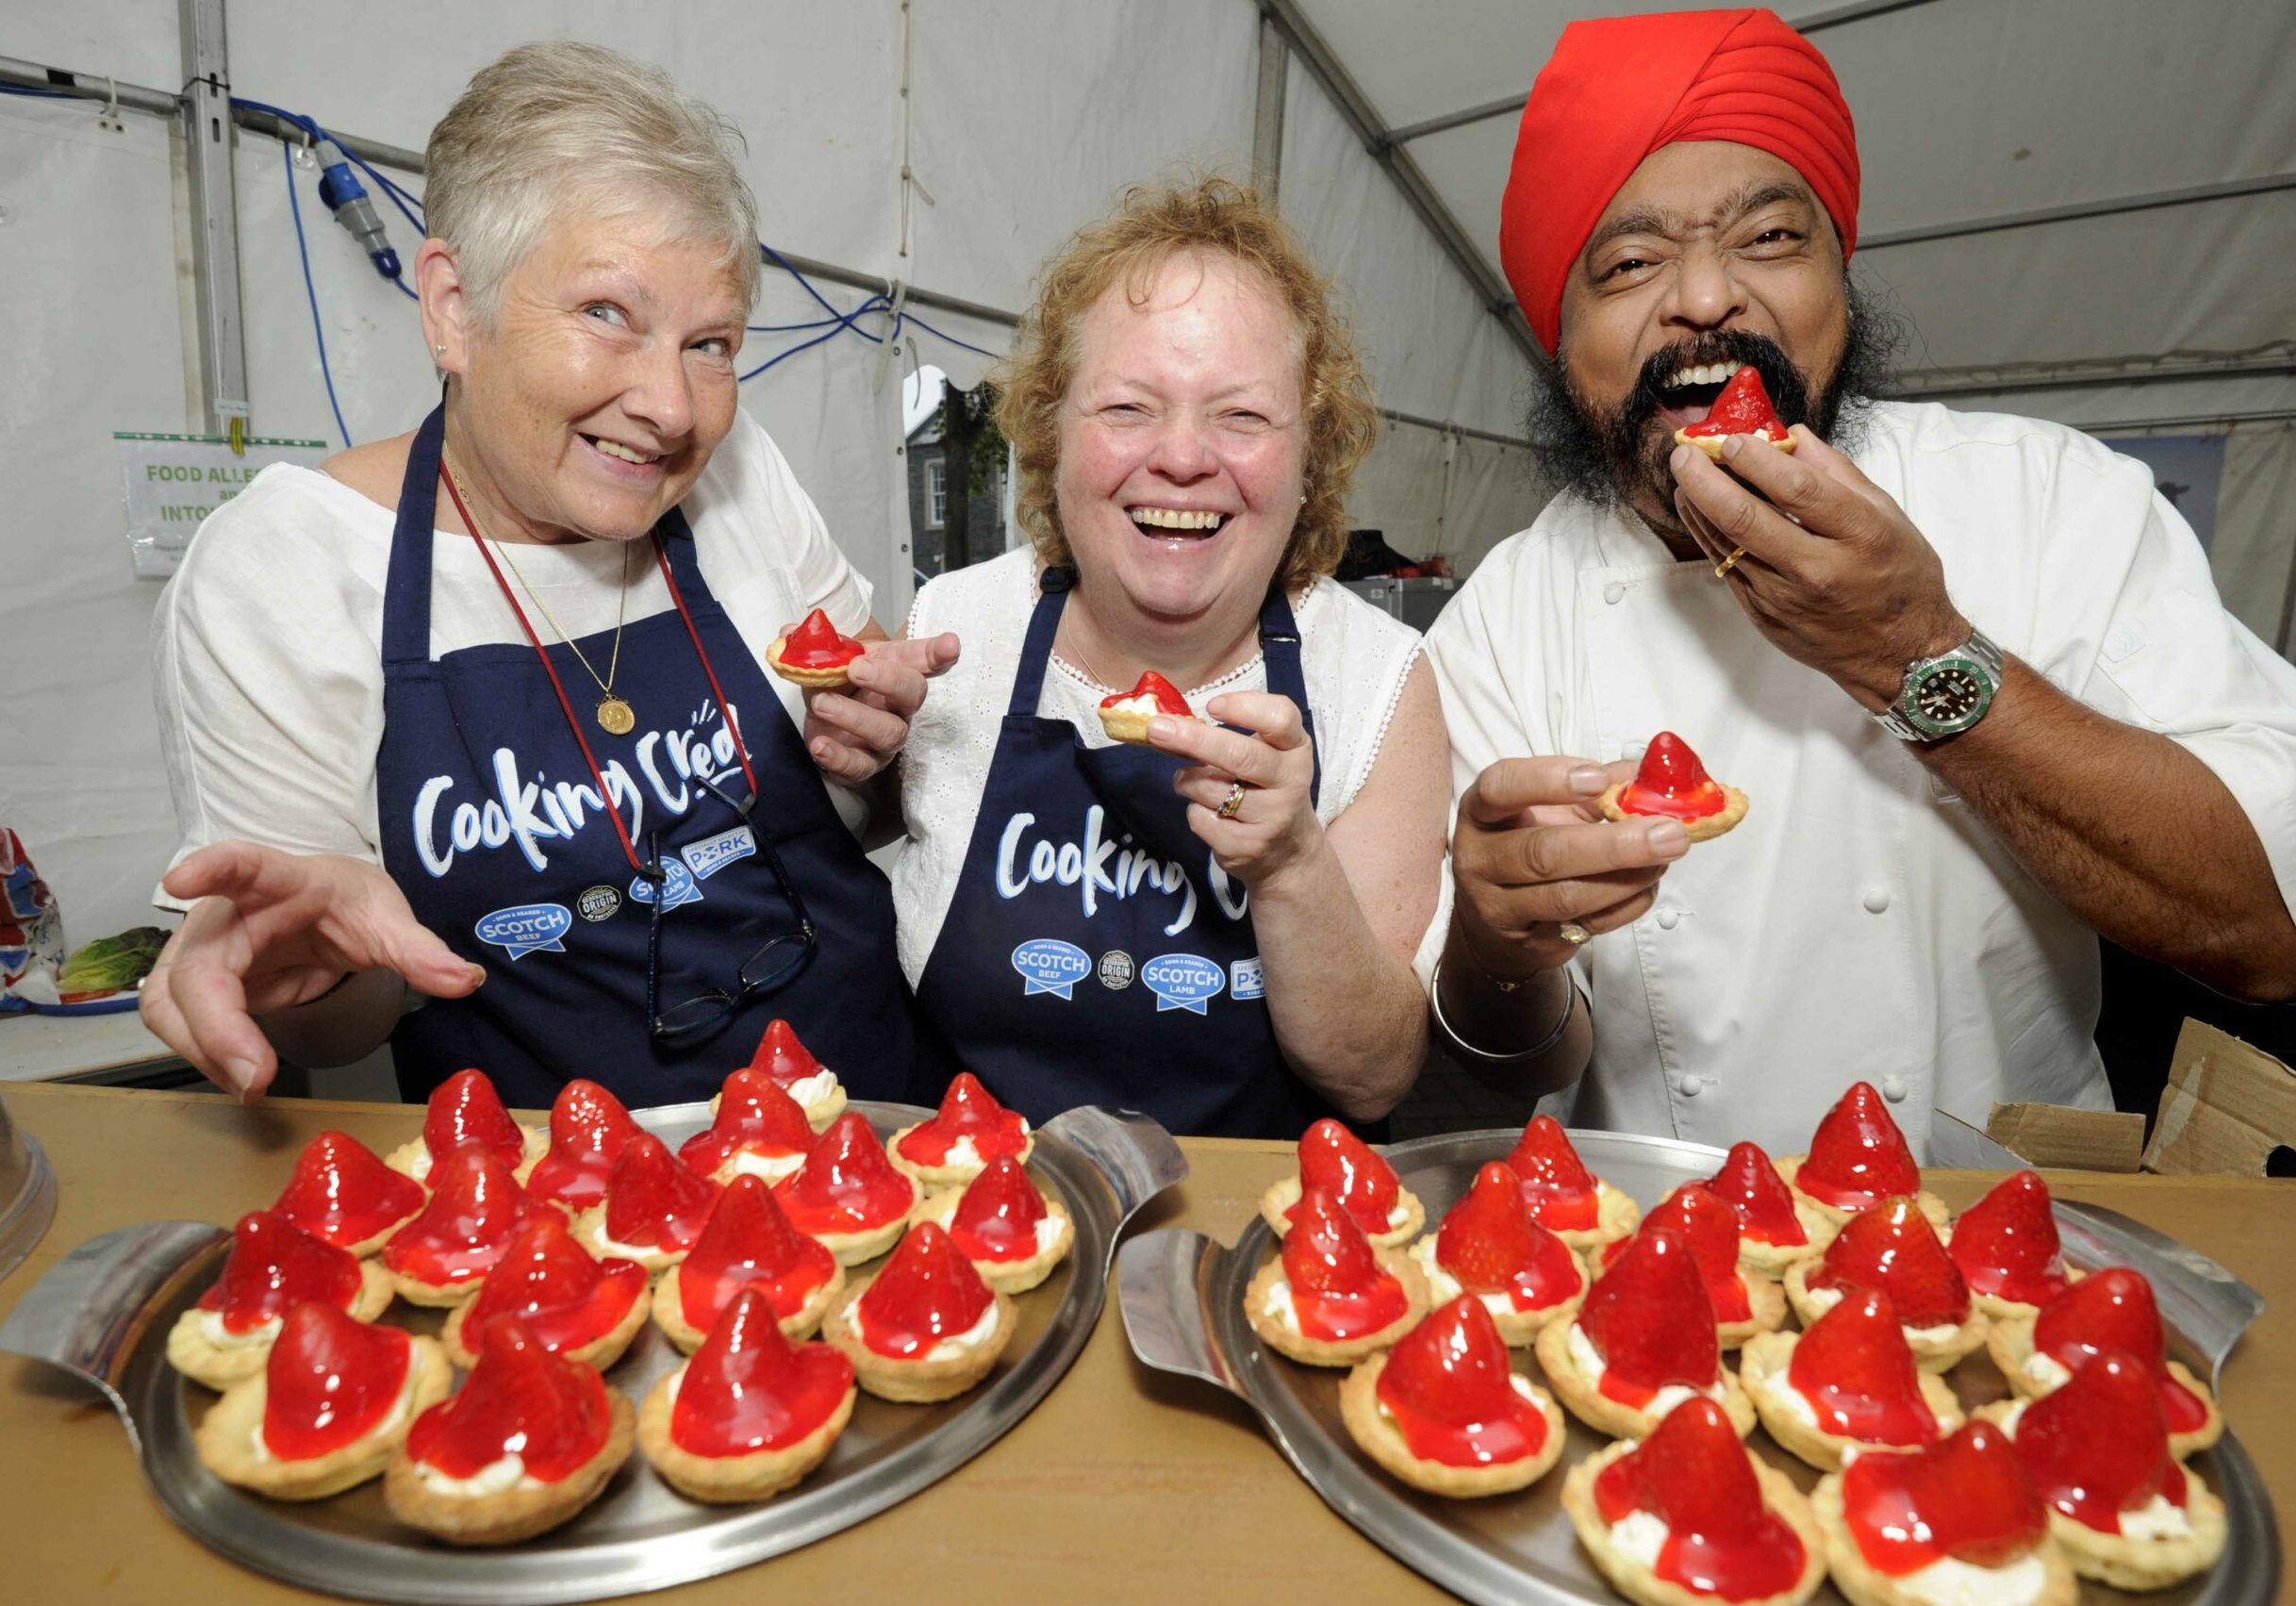 Stranraer 2022 Oyster Festival, 03/09/2022:
Celebrity chef Tony Singh (right).
Photography for Stranraer Development Trust from: Colin Hattersley Photography - www.colinhattersley.com - cphattersley@gmail.com - 07974 957 388.